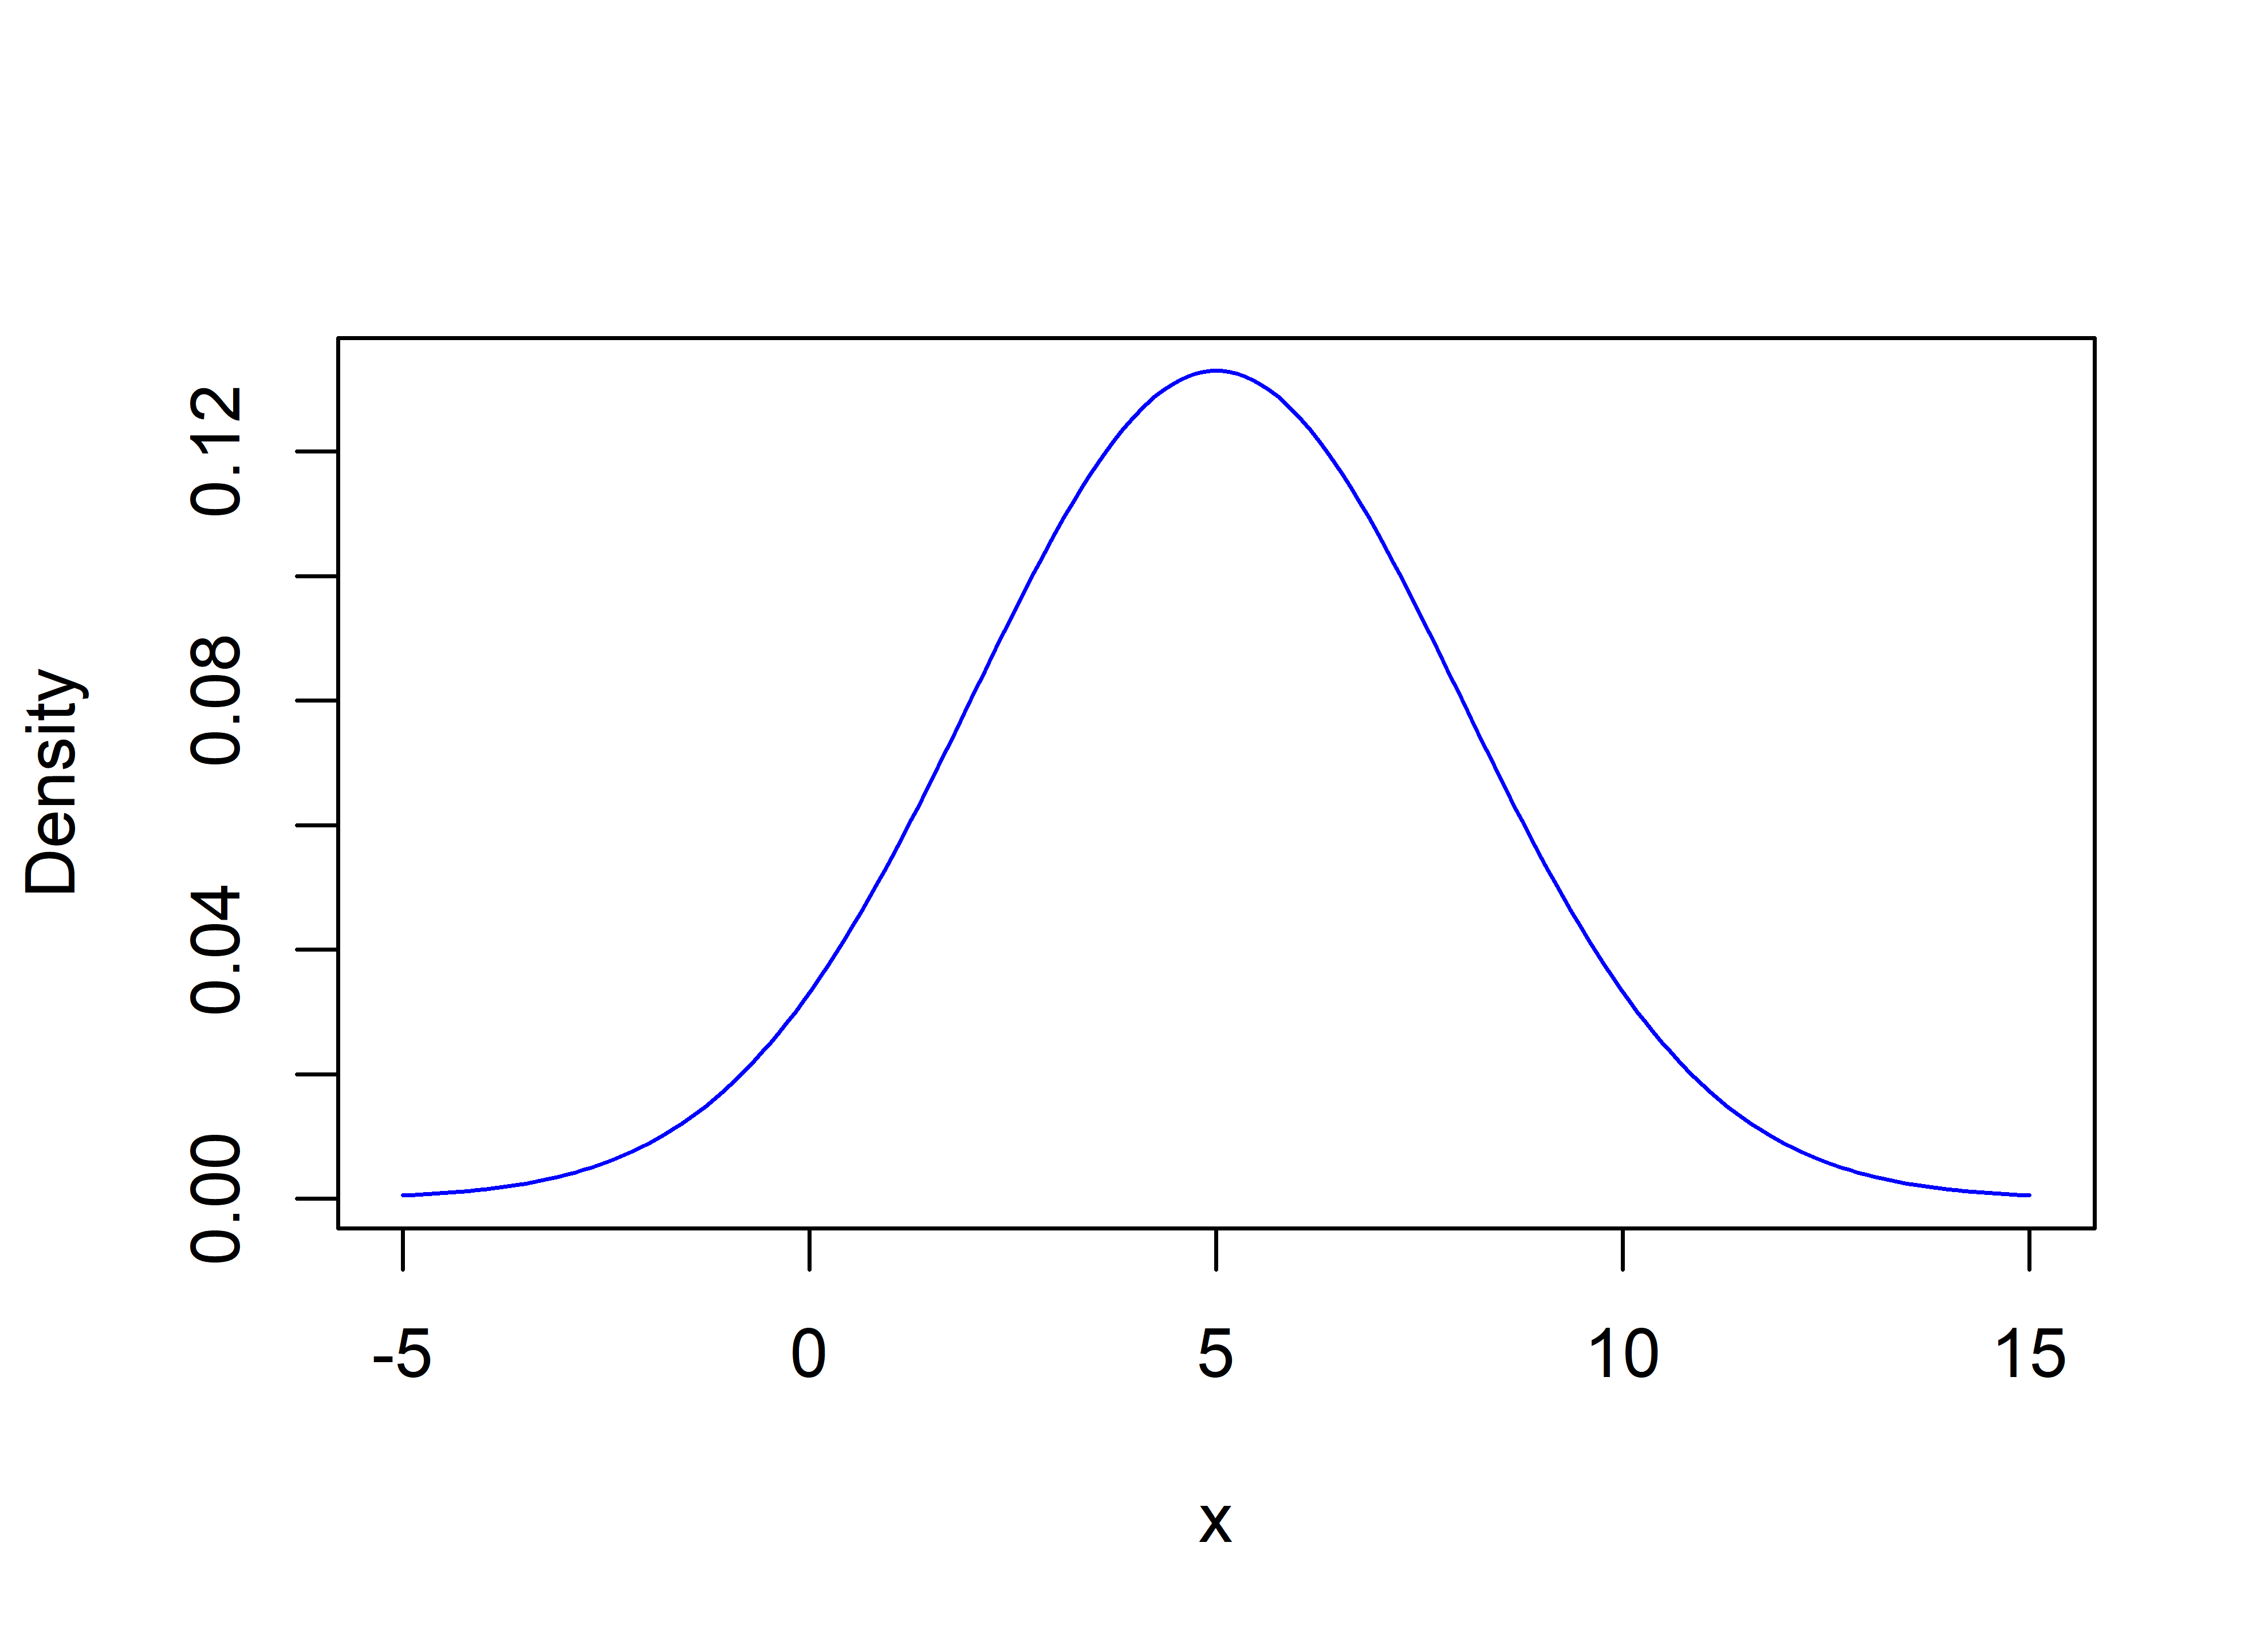 Gaussian probability density function with mean 5 and standard deviation 3.